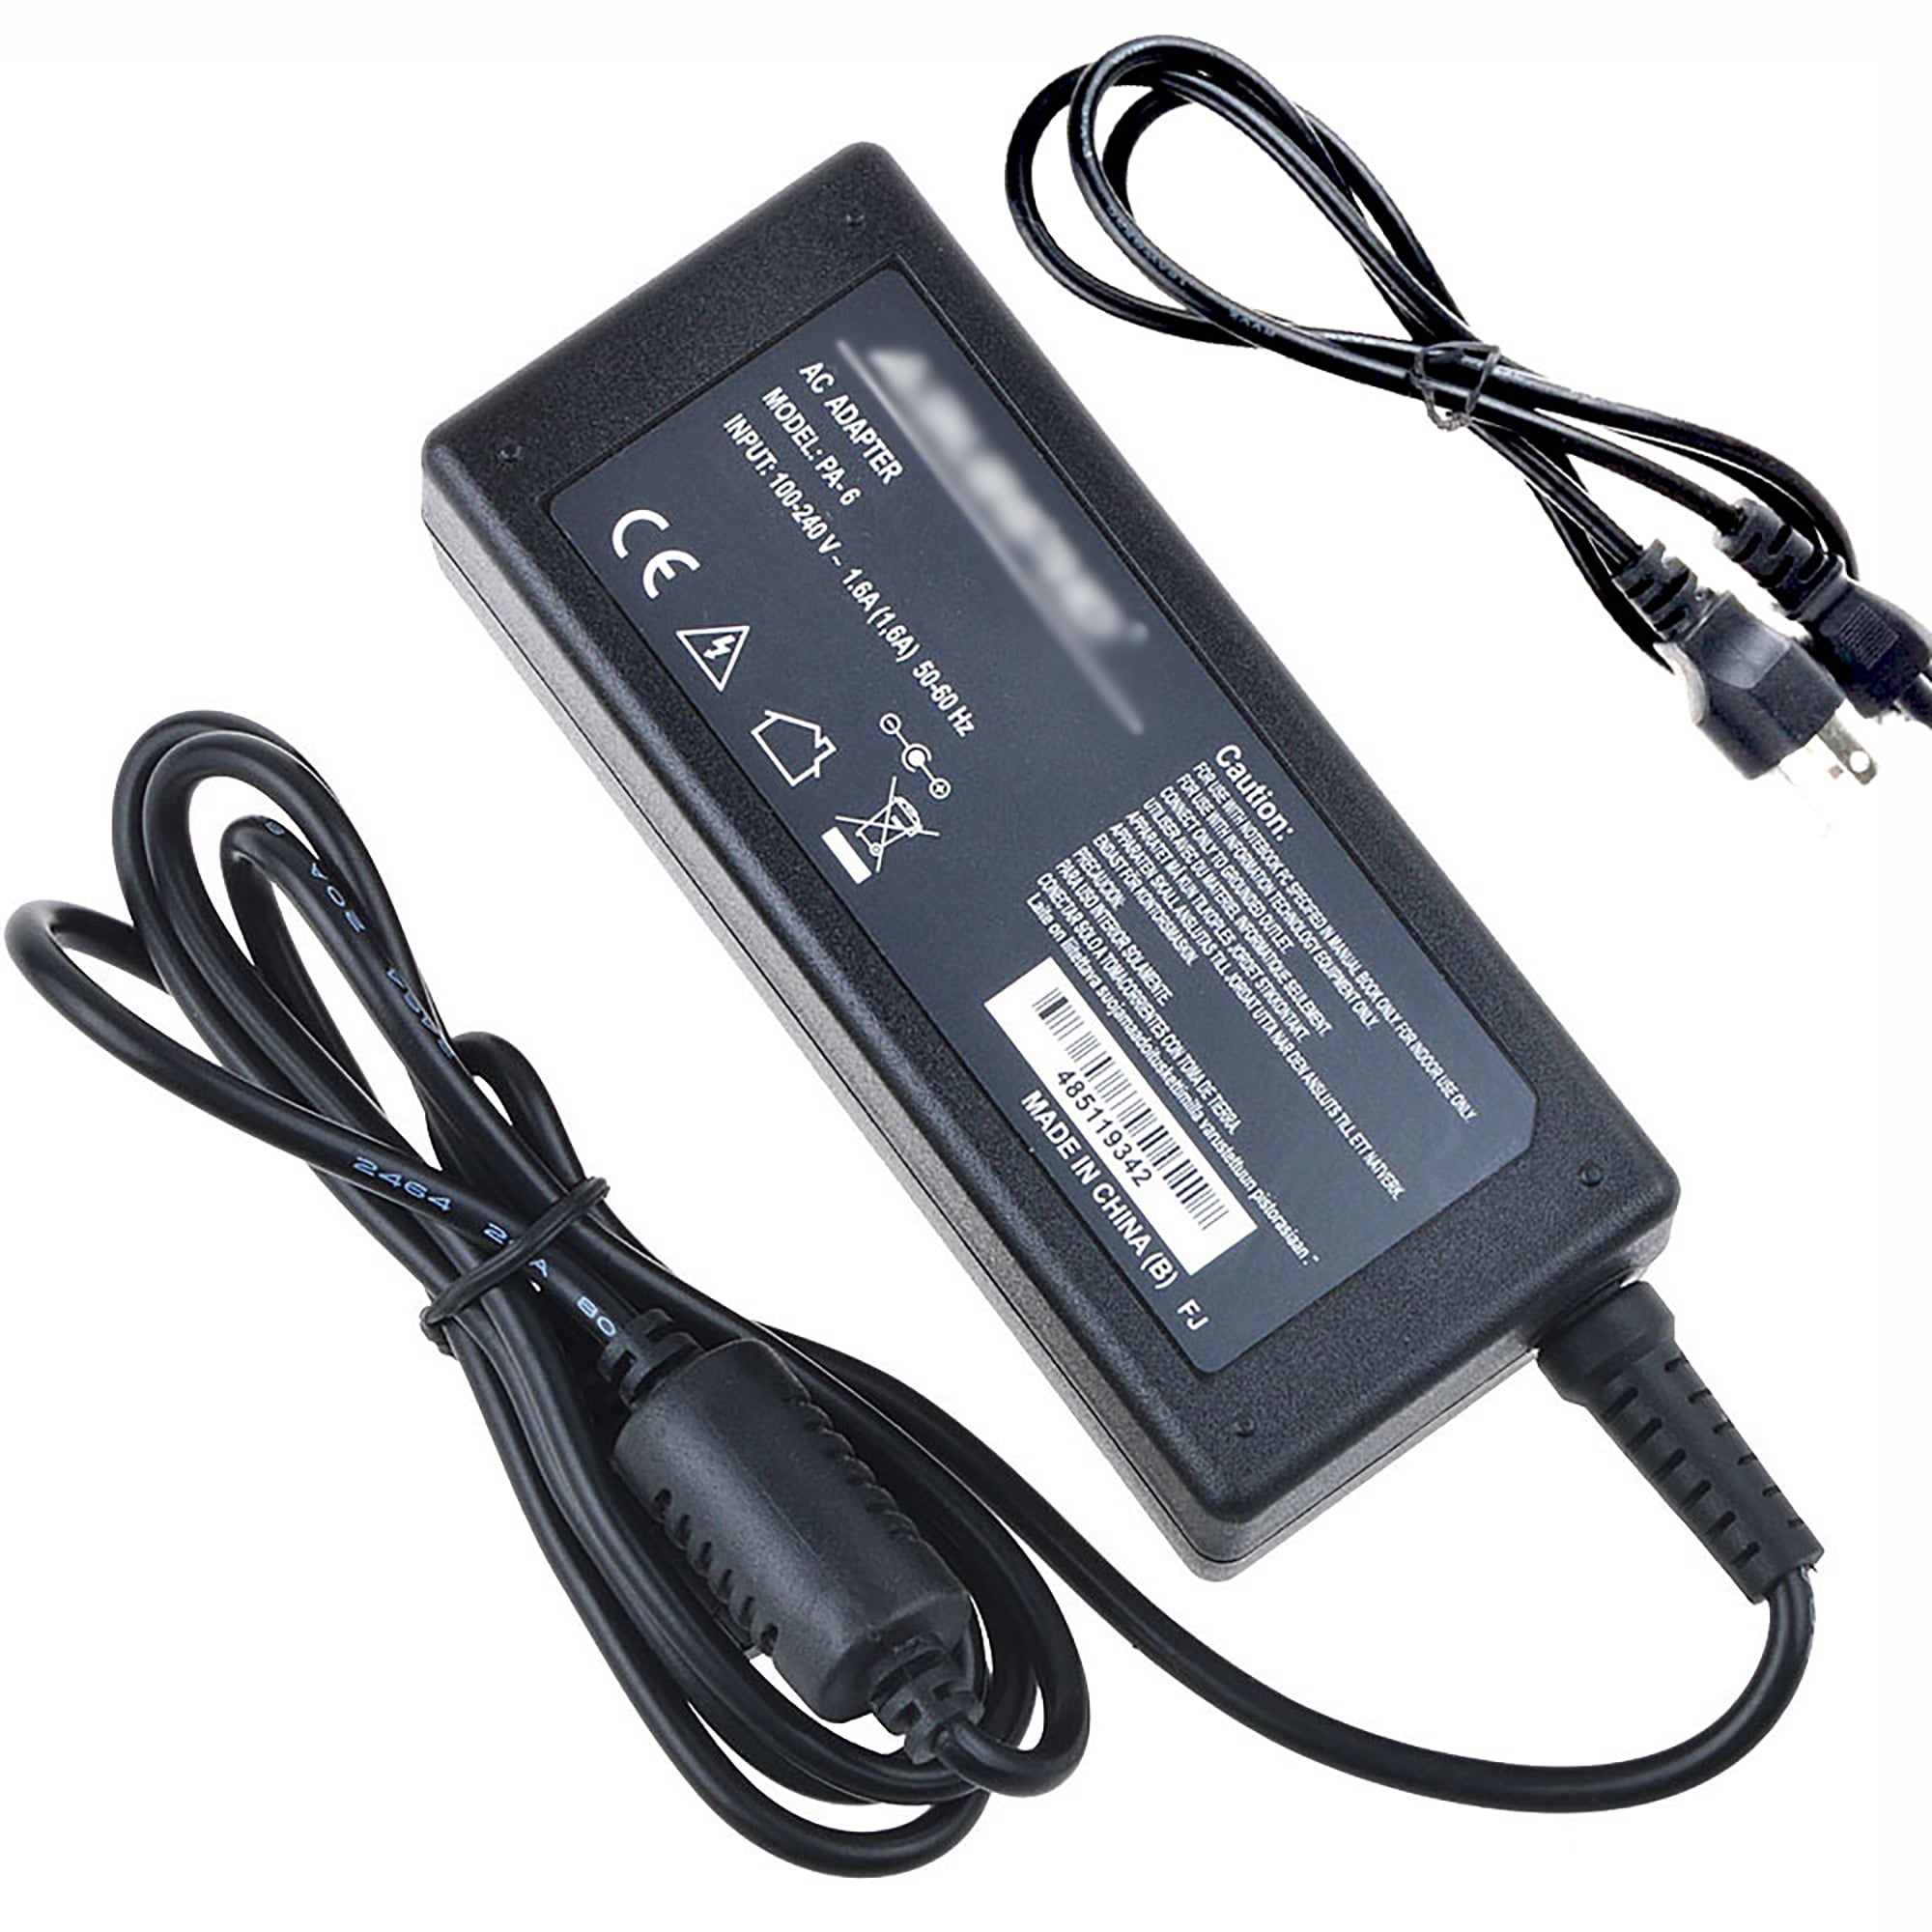 PKPOWER 65W AC DC Adapter For Asus K52F-RGR6 A52F-XN1 X44Hy-Vx067D  K52F-RBR9 A7CC-7S001 Z9200Ne U36SD-1ARX K70Ic-A2 X80LE-4P099H X80LE-4P137E  